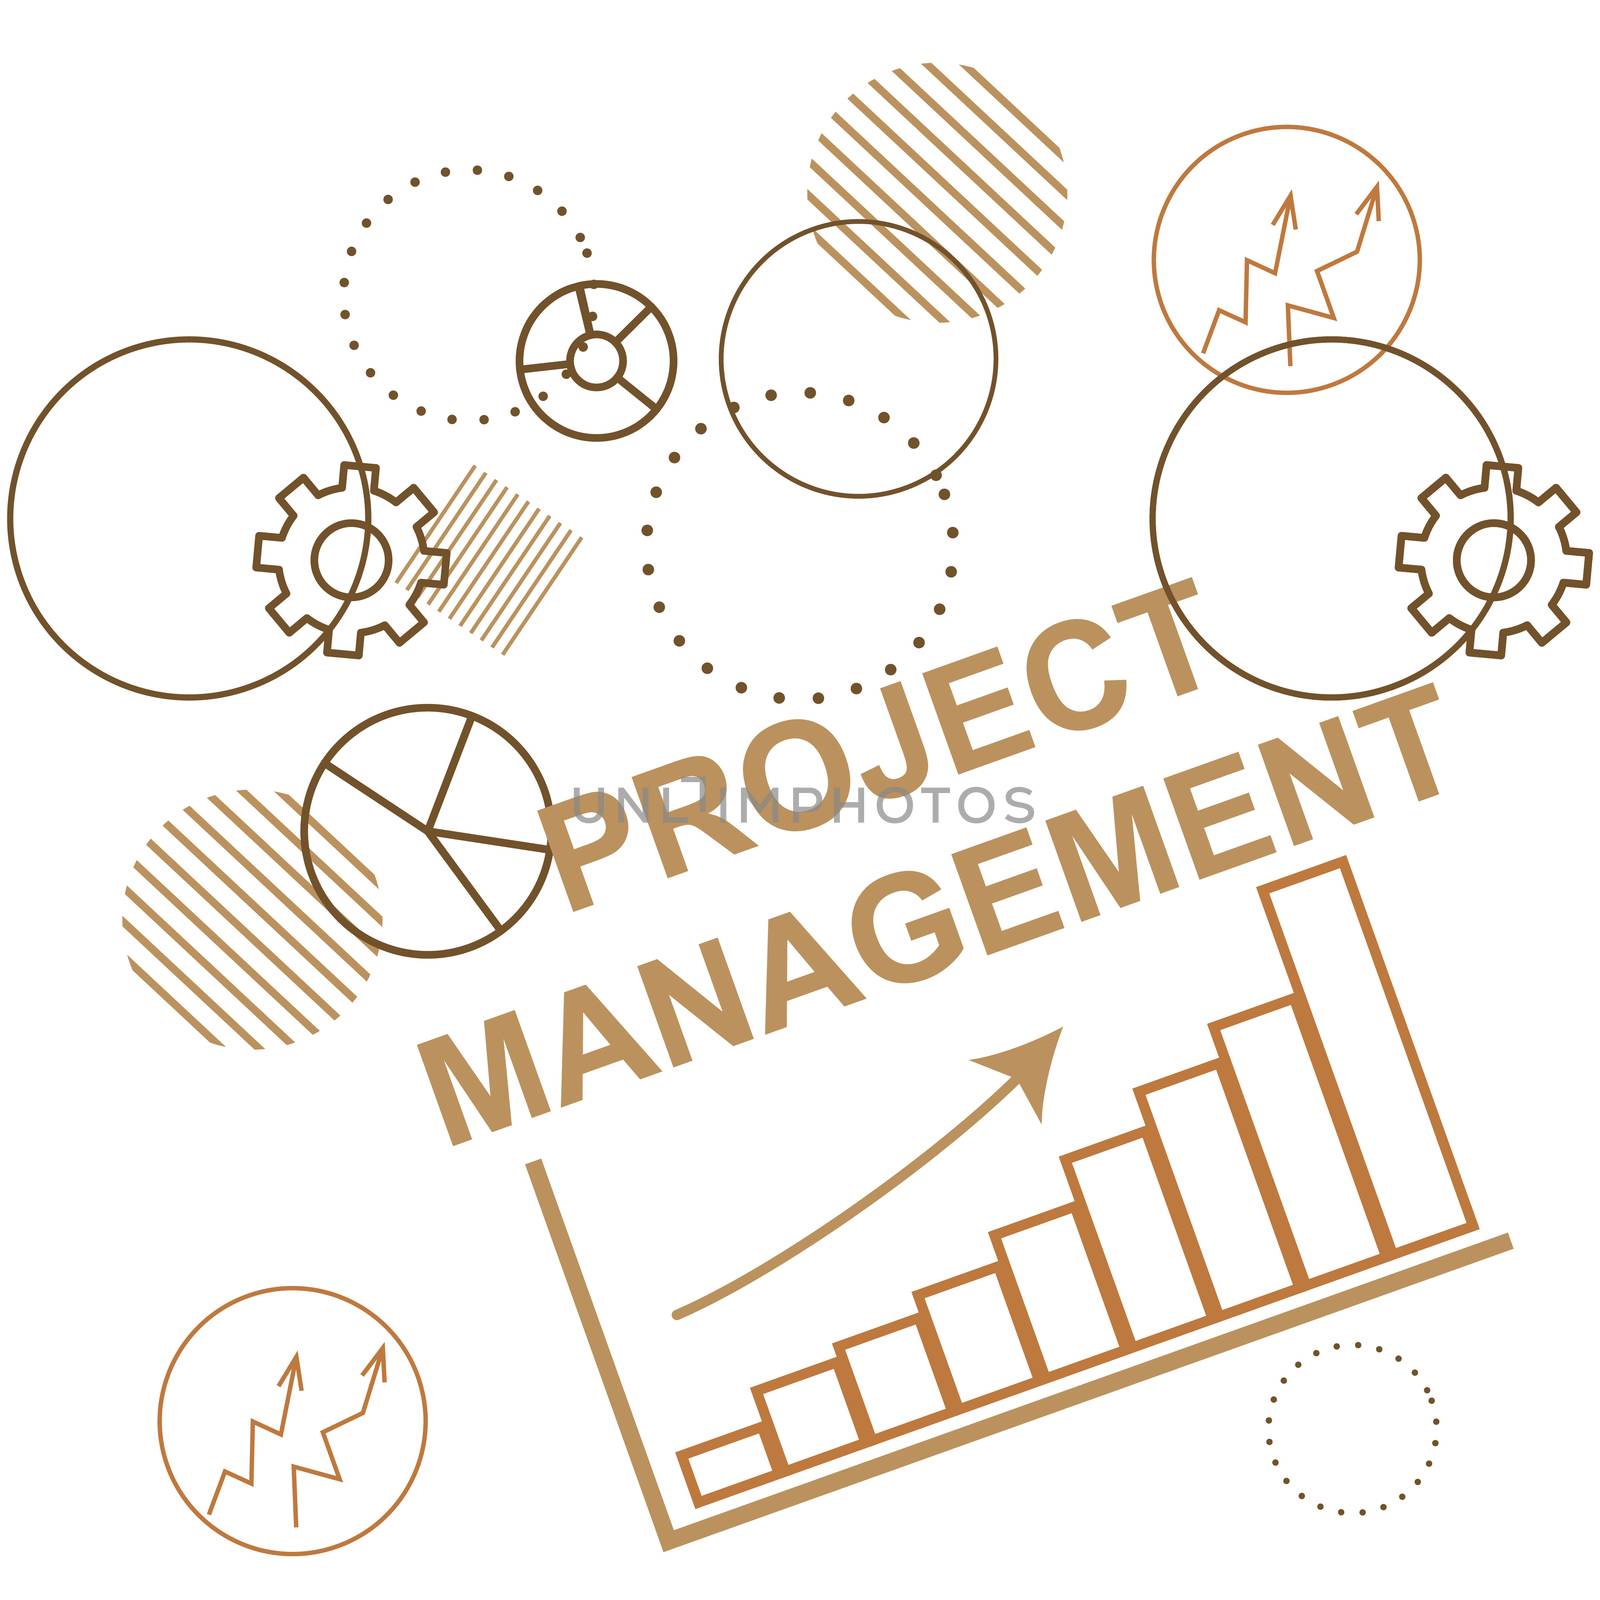 Background to the project management, business planning process. Abstraction. by Adamchuk